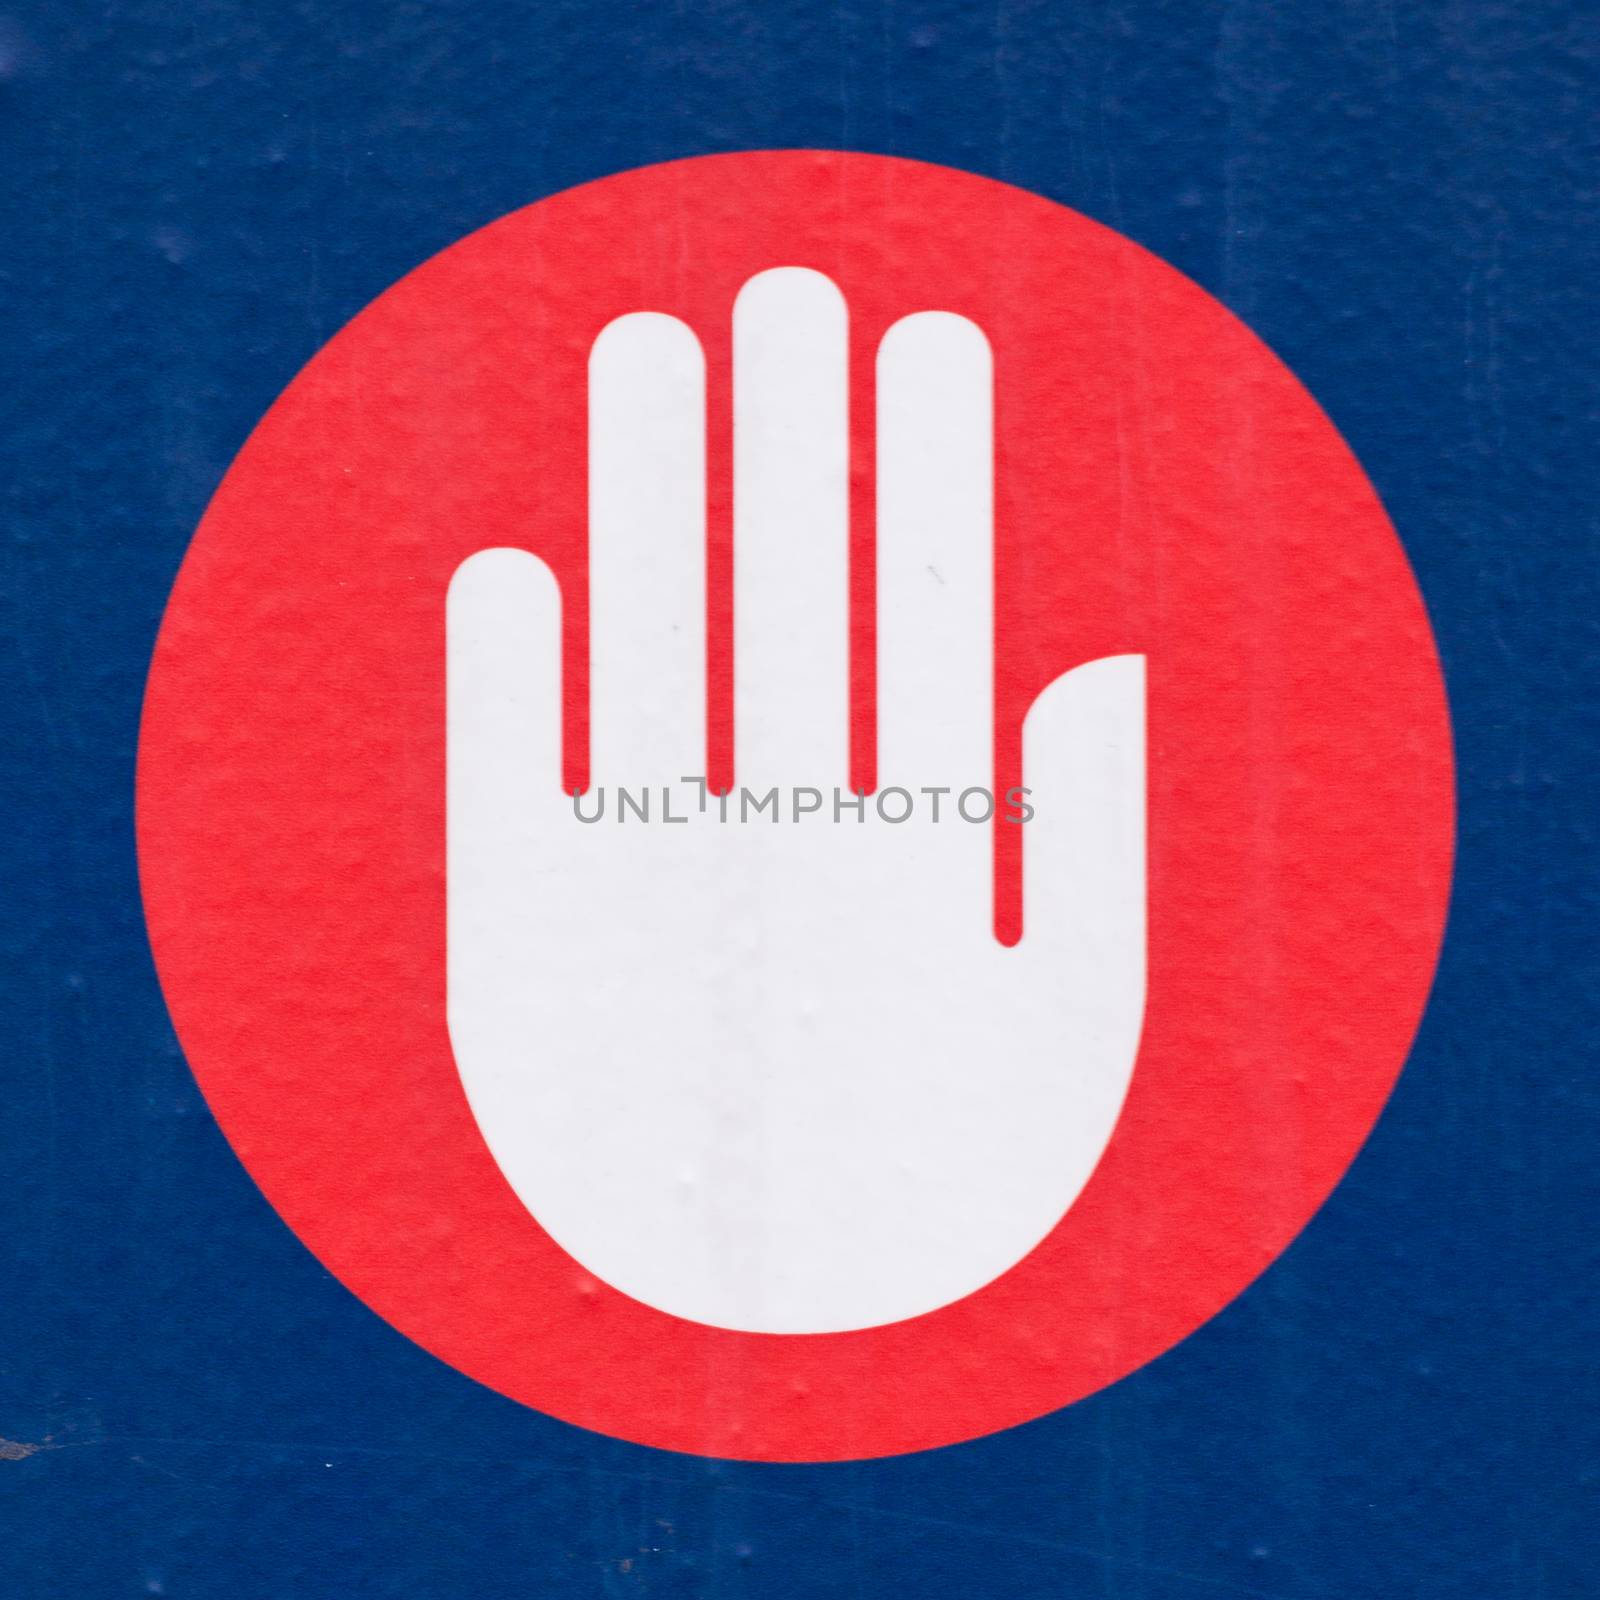 Halt or Stop sign showing the palm of a hand calling a halt, bringing an end to something or forbidding entry